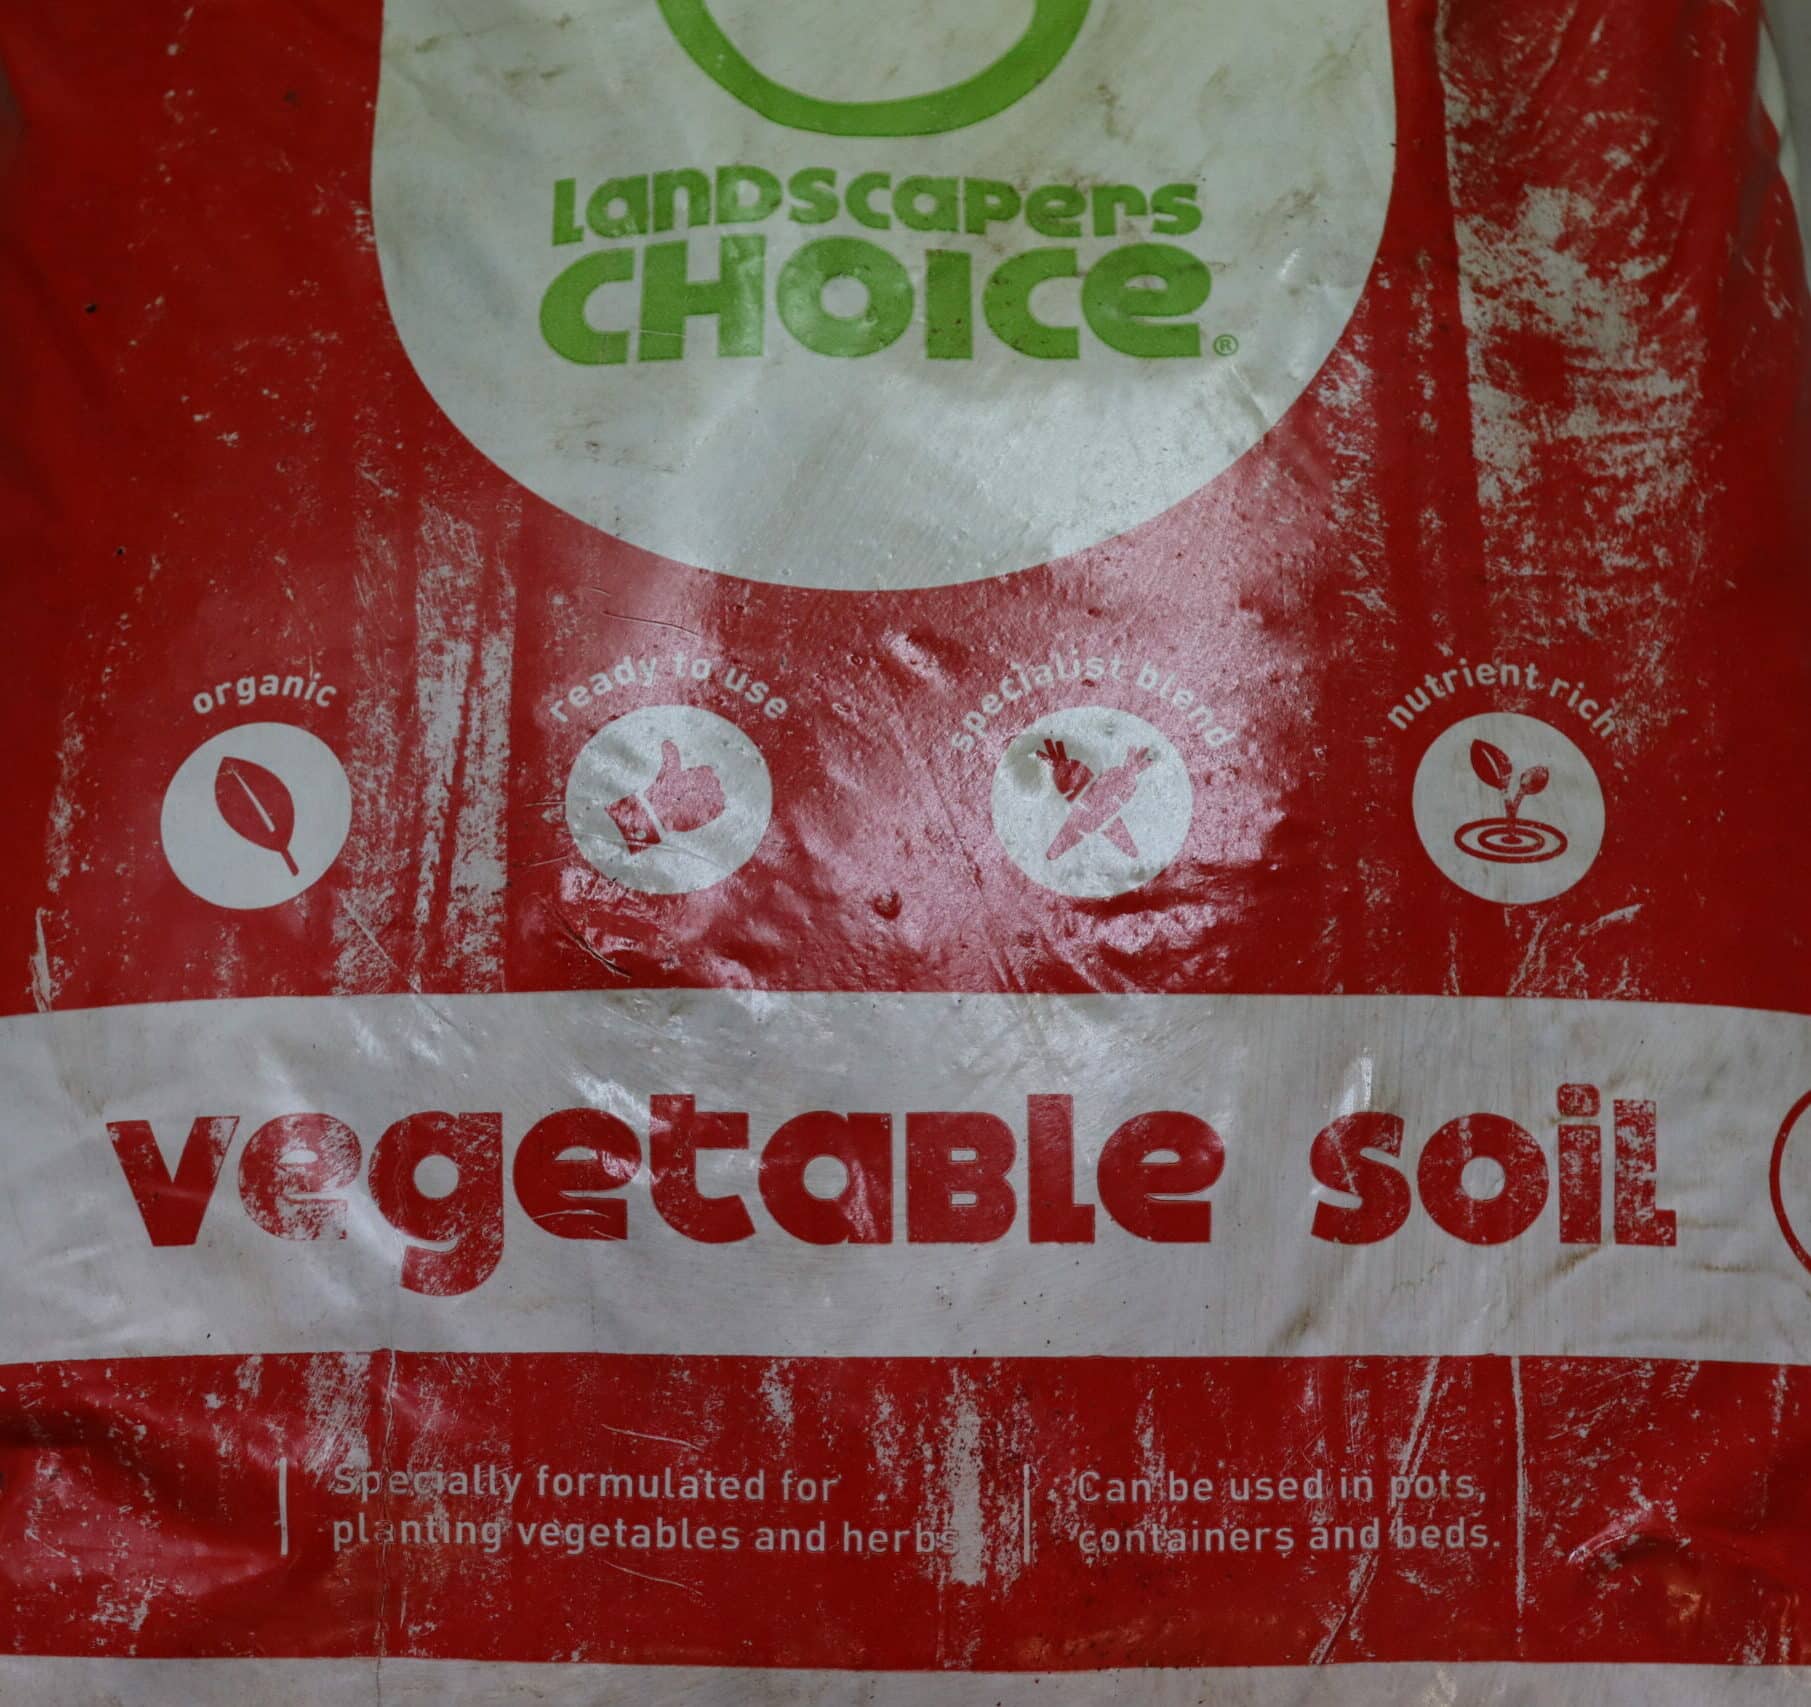 Bag of Landscapers Choice organic vegetable soil.